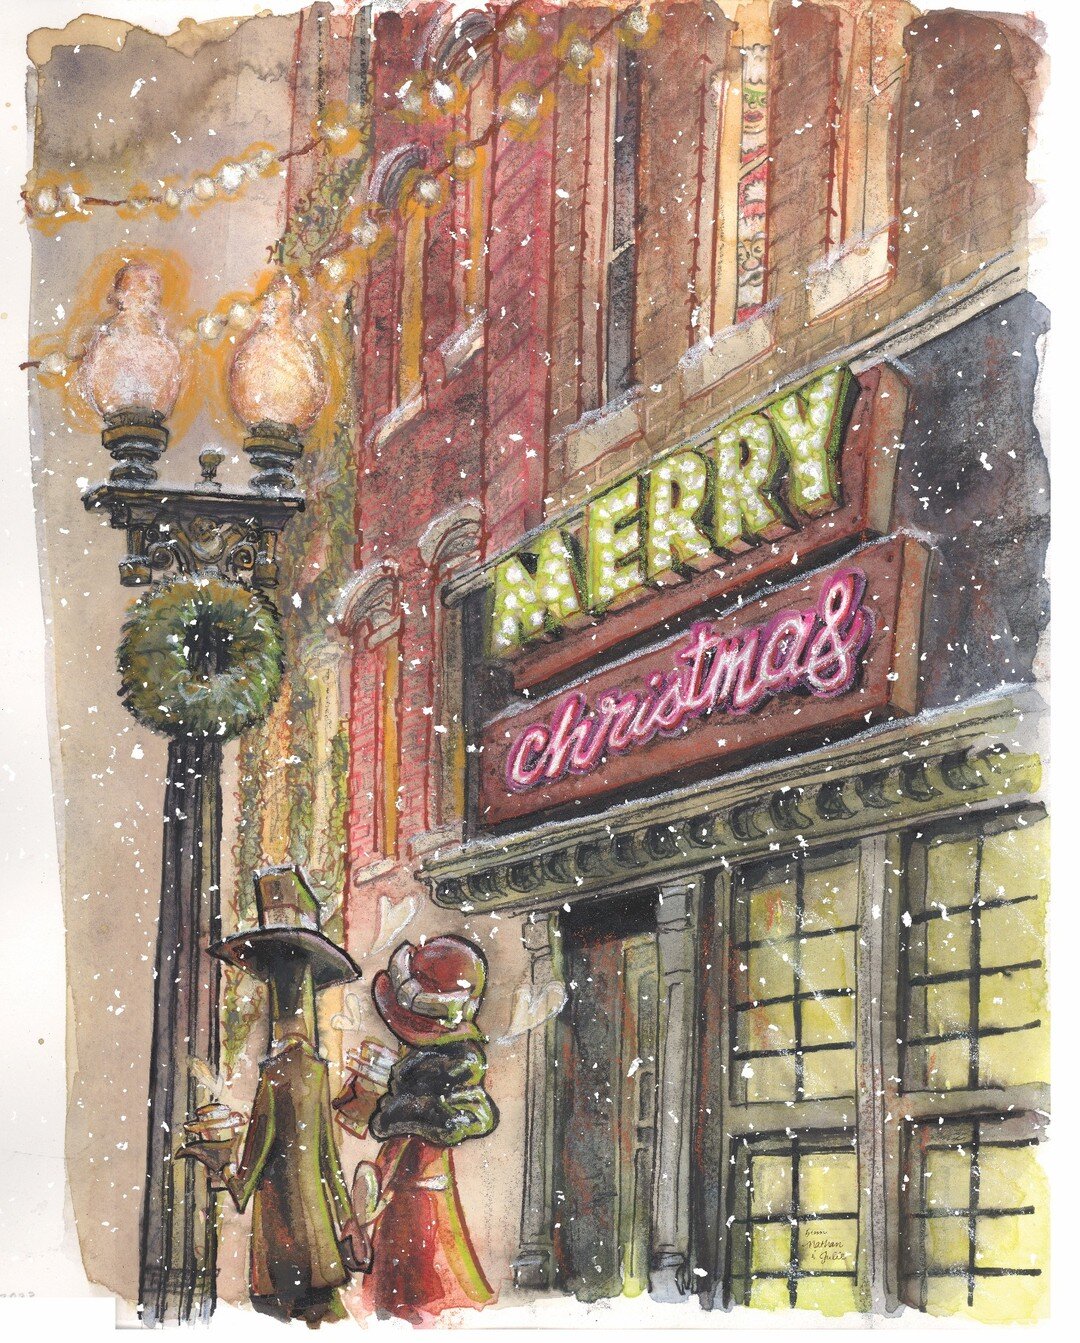 CITY DATE or CITY STROLL from the COFFEE LOVERS&rsquo; CHRISTMAS series [ 2023. Mixed Media on Arches 140 lb. Hot Press ]
.
This painting was one of our best selling greeting cards and giclee prints this year. It originated as a sketch that I drew wh